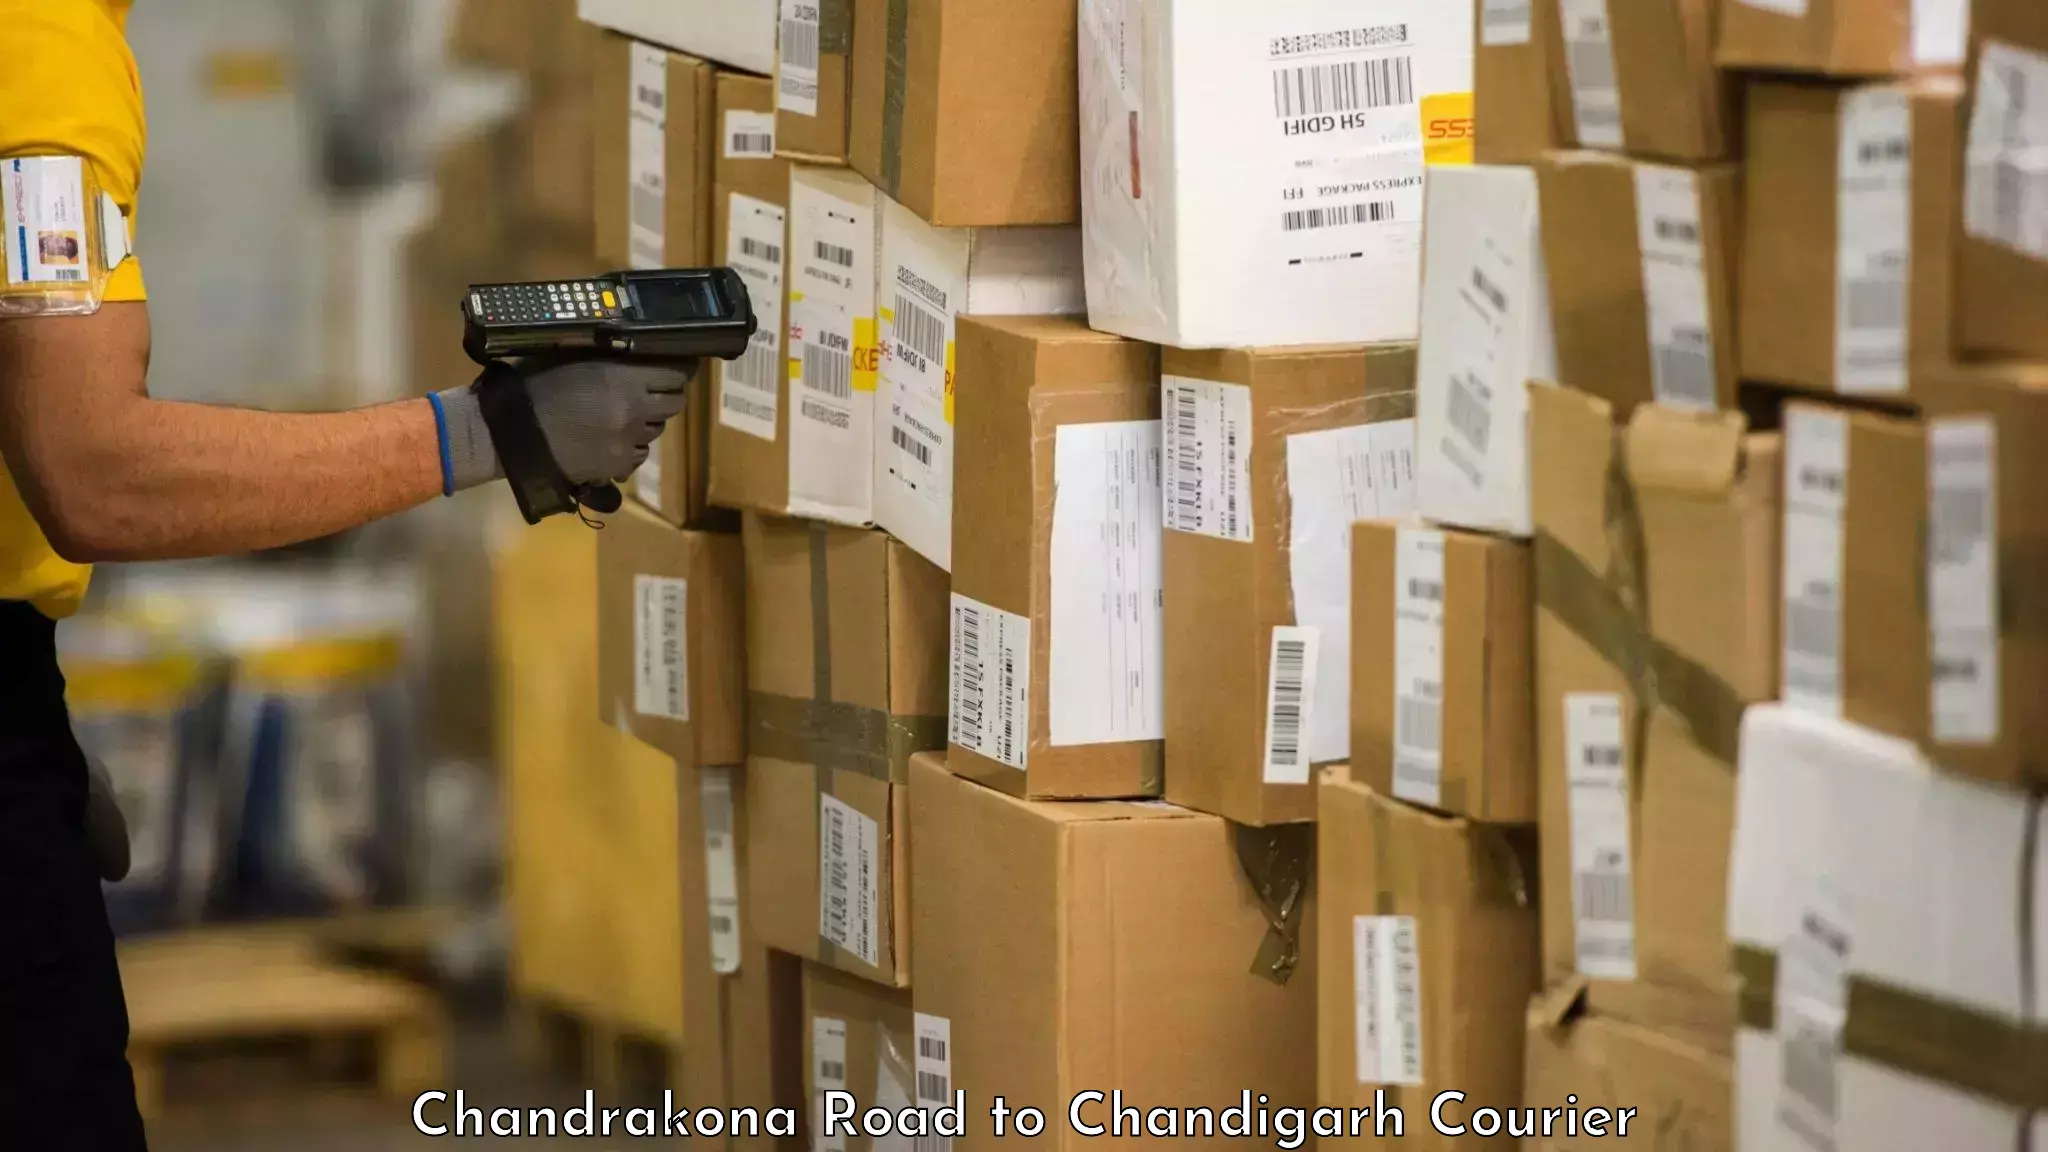 Luggage delivery providers Chandrakona Road to Chandigarh